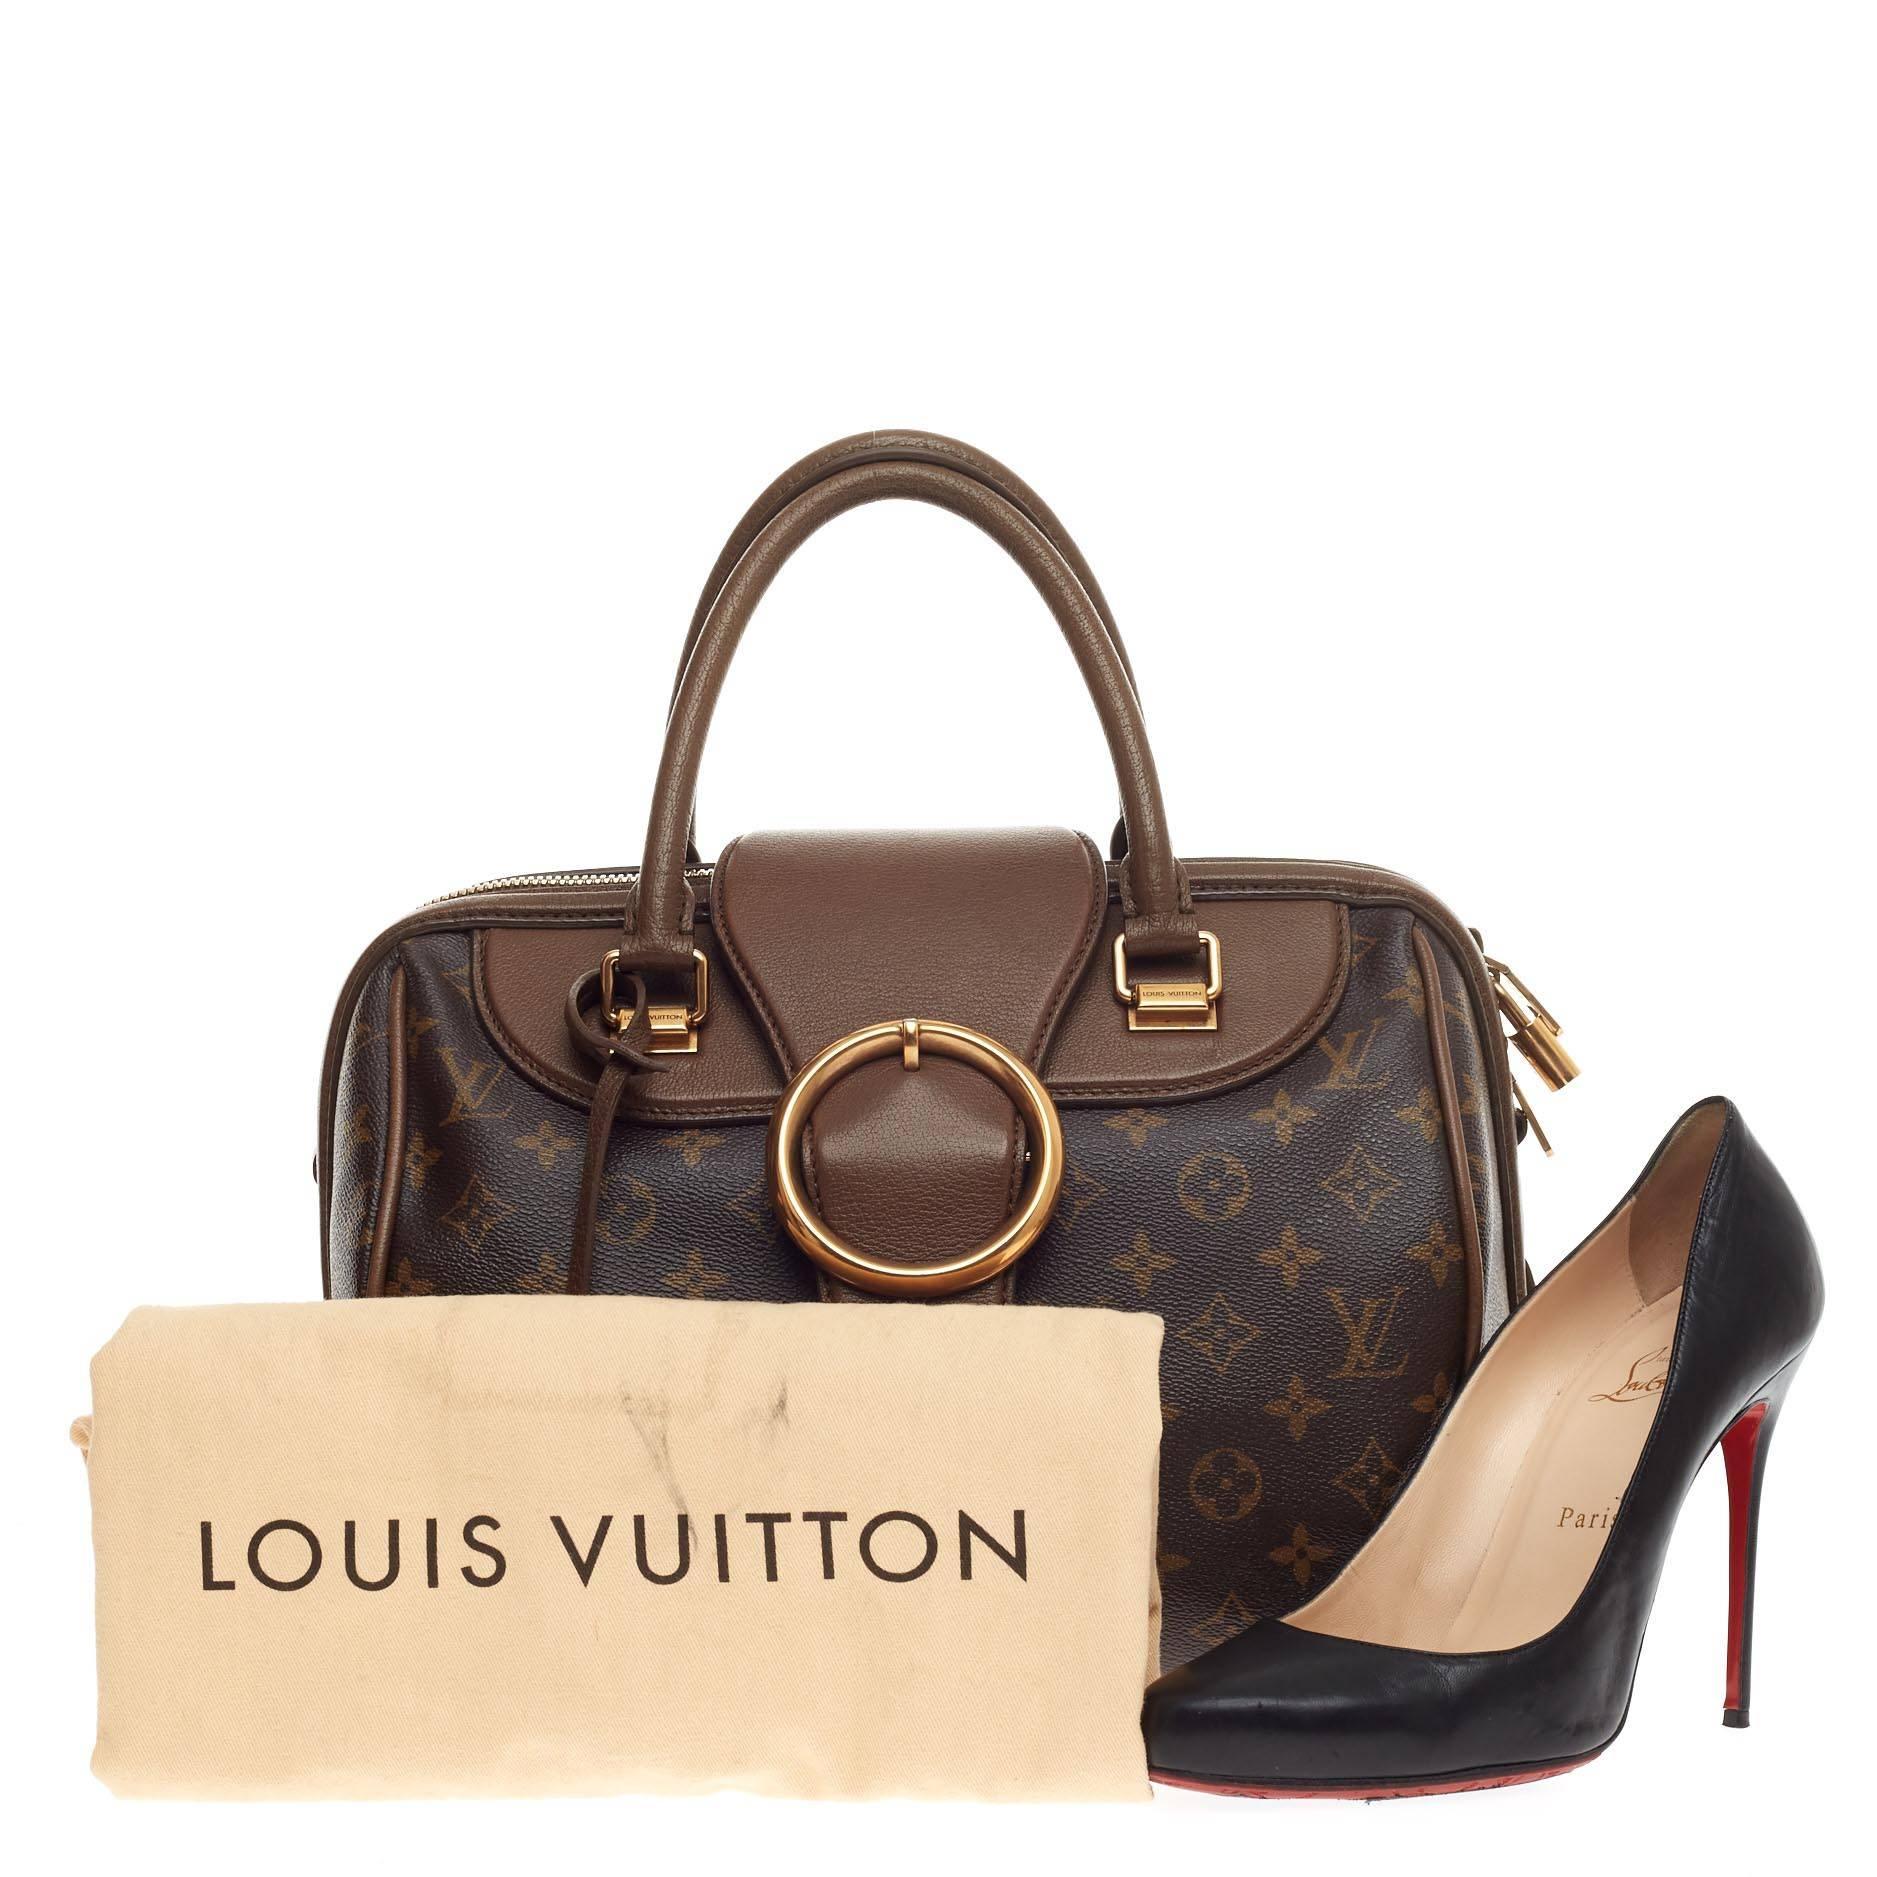 This authentic Louis Vuitton Speedy Limited Edition Golden Arrow presented in the brand's Fall/Winter 2012 Collection draws inspiration from a 1920s luxury boat train reimagined for today's chic traveler. Crafted from Louis Vuitton’s signature brown